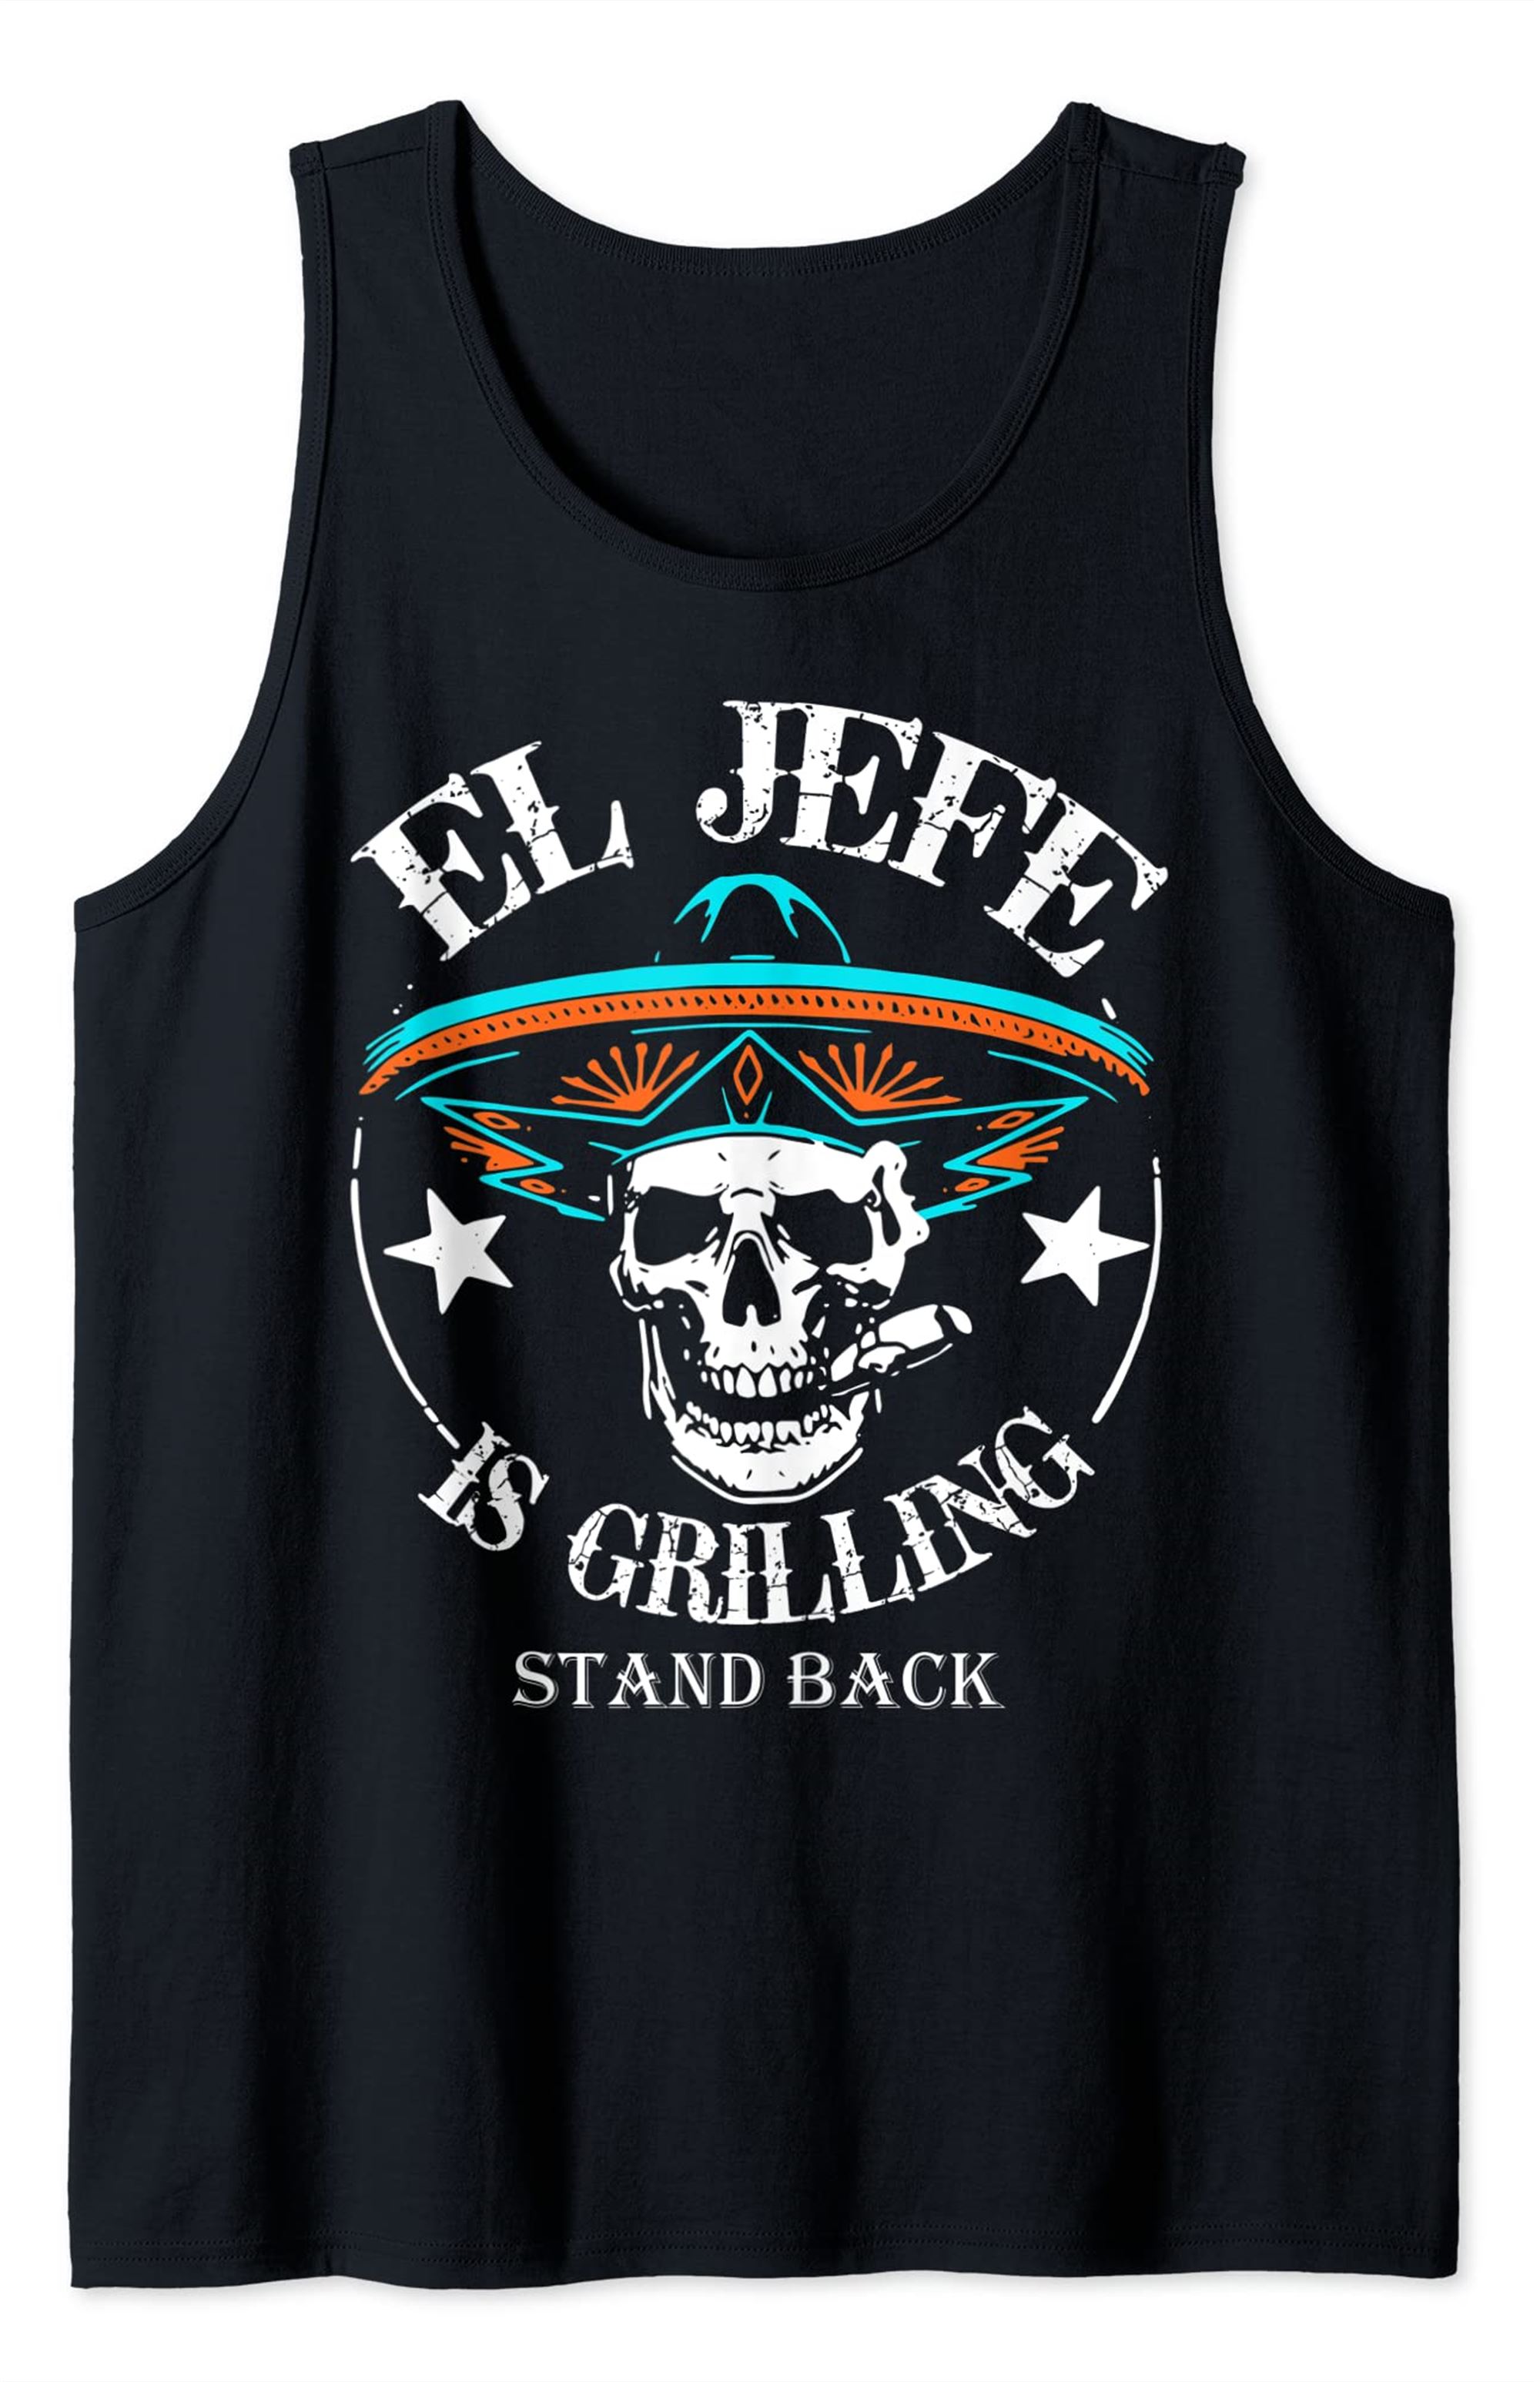 El Jefe Grilling Stand Back Funny Mexican Dad Playera Tank Top Plus Size Up To 5xl